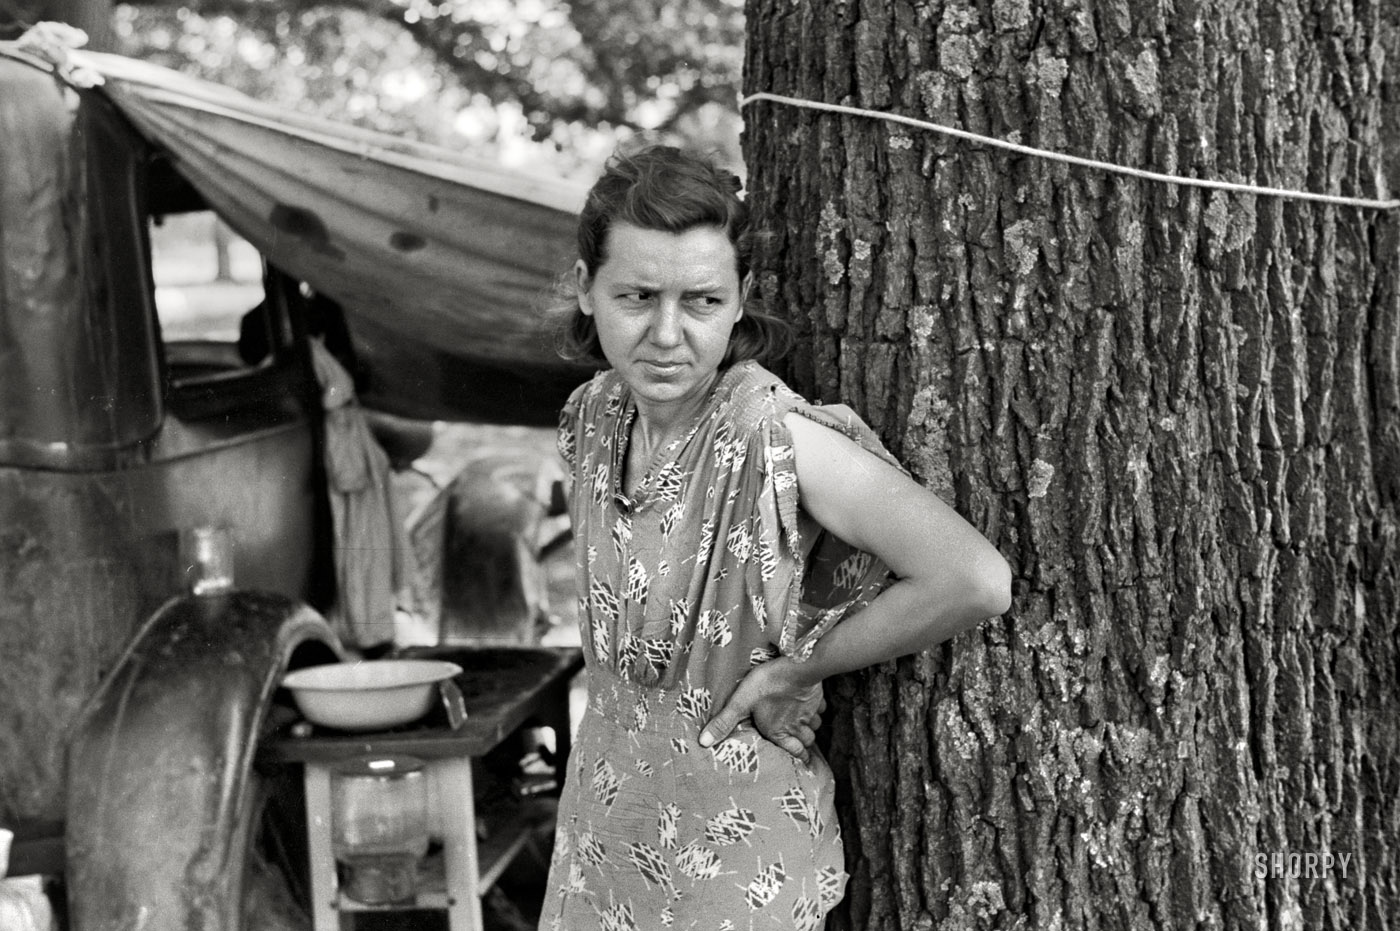 July 1940. Berrien County, Michigan. "Migrant woman from Arkansas in roadside camp of cherry pickers." Our third look at this lady next to the battered sedan that her family calls home. 35mm nitrate negative by John Vachon. View full size.